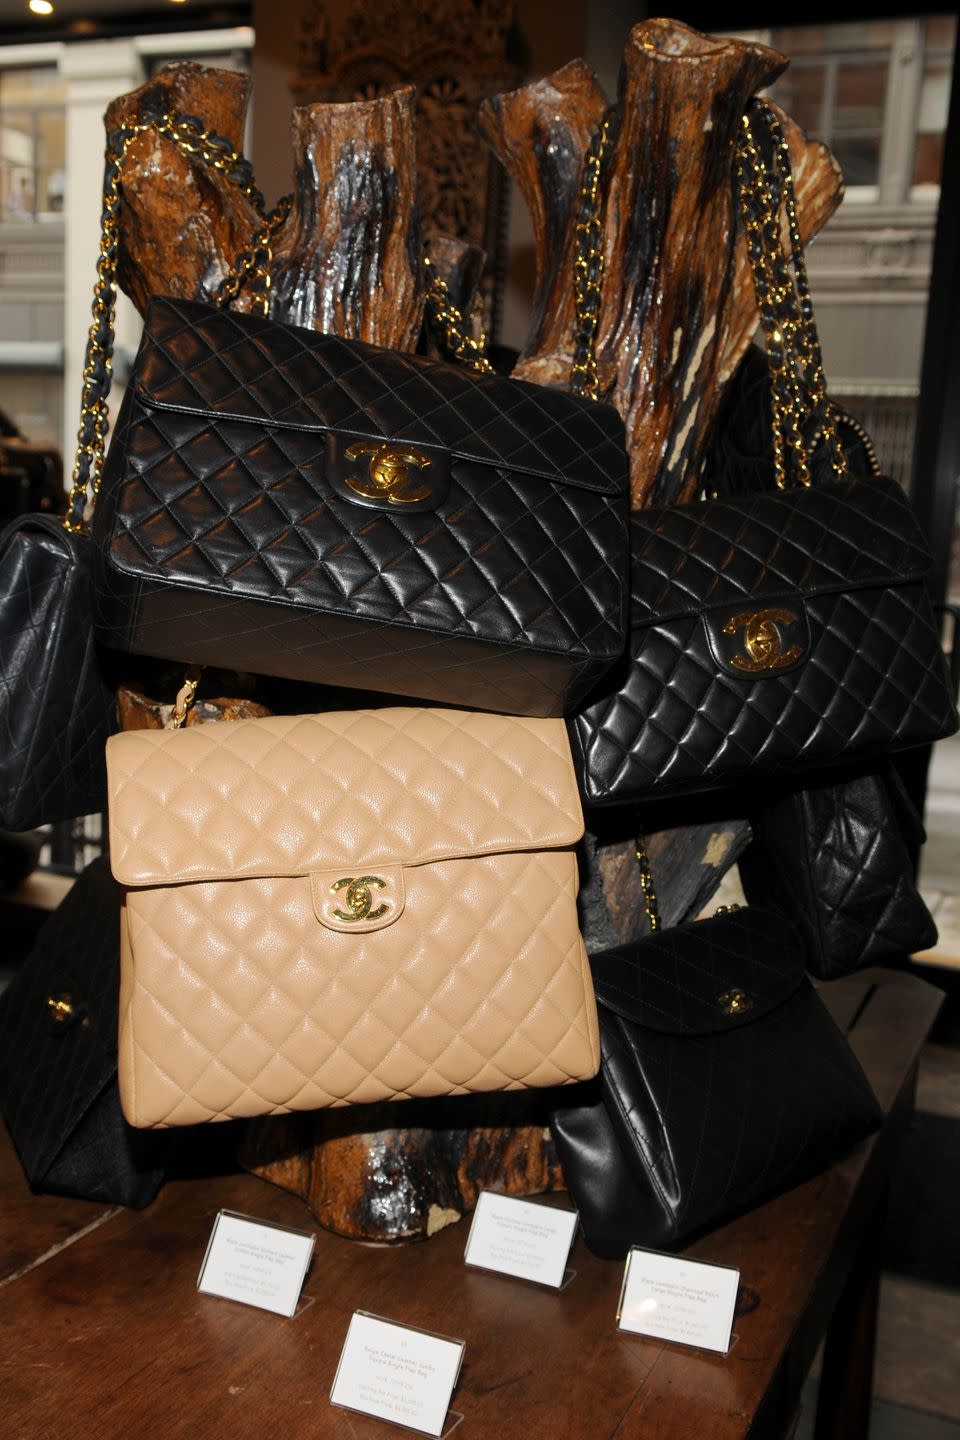 <p>If your mom’s outgrown her vintage Chanel, she might want to put it back on the market. Designer handbag styles often come and go, which means secondhand purses can sell for<a href="https://go.redirectingat.com?id=74968X1596630&url=https%3A%2F%2Fwww.ebay.com%2Fsch%2Fi.html%3F_from%3DR40%26_trksid%3Dp2334524.m570.l2632.R3.TR12.TRC2.A0.H0.TRS0%26_nkw%3Dvintage%2Bpurse%26_sacat%3D169291%26LH_TitleDesc%3D0%26_udlo%3D2%252C000%26_osacat%3D175759%26_odkw%3Dvintage%2Bpurse%26LH_Complete%3D1%26LH_Sold%3D1&sref=https%3A%2F%2Fwww.oprahdaily.com%2Flife%2Fwork-money%2Fg40653577%2Ftop-valuable-antiques-items-parents-house%2F" rel="nofollow noopener" target="_blank" data-ylk="slk:more than double their original price." class="link "> more than double their original price.</a> </p>